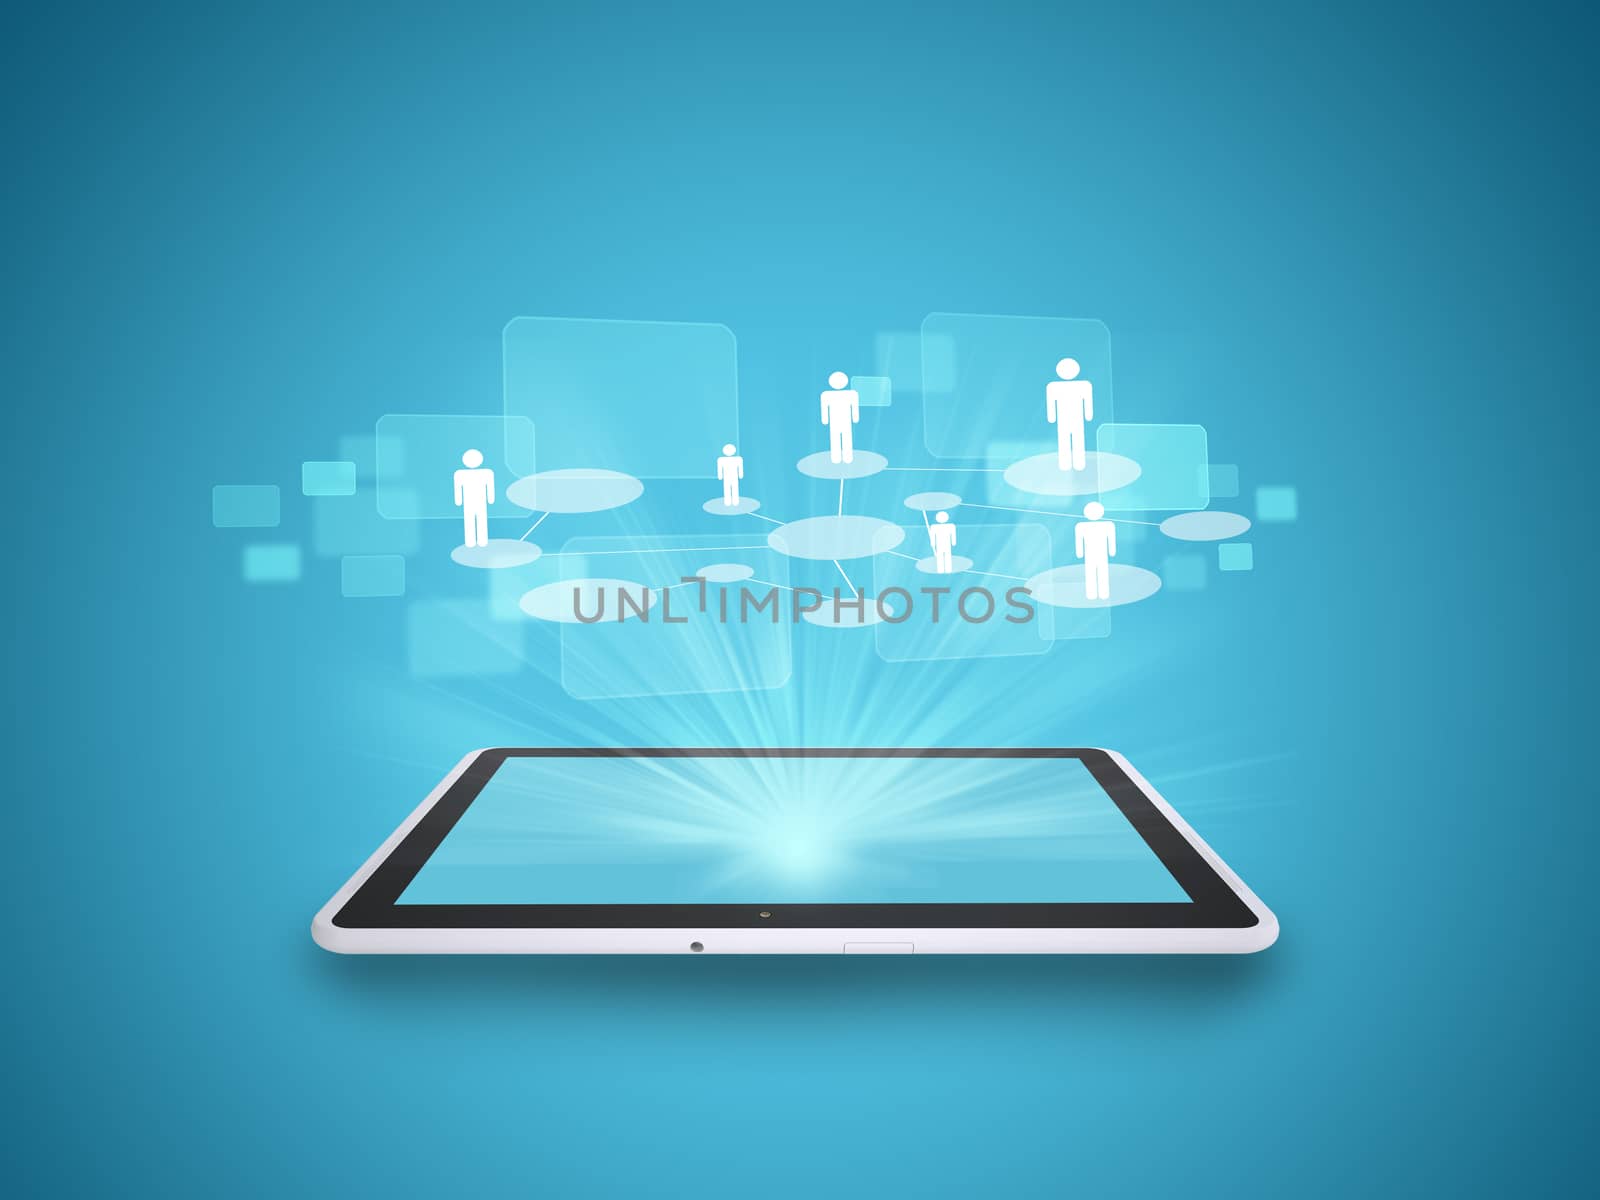 Tablet on abstract blue background with circles and people symbols